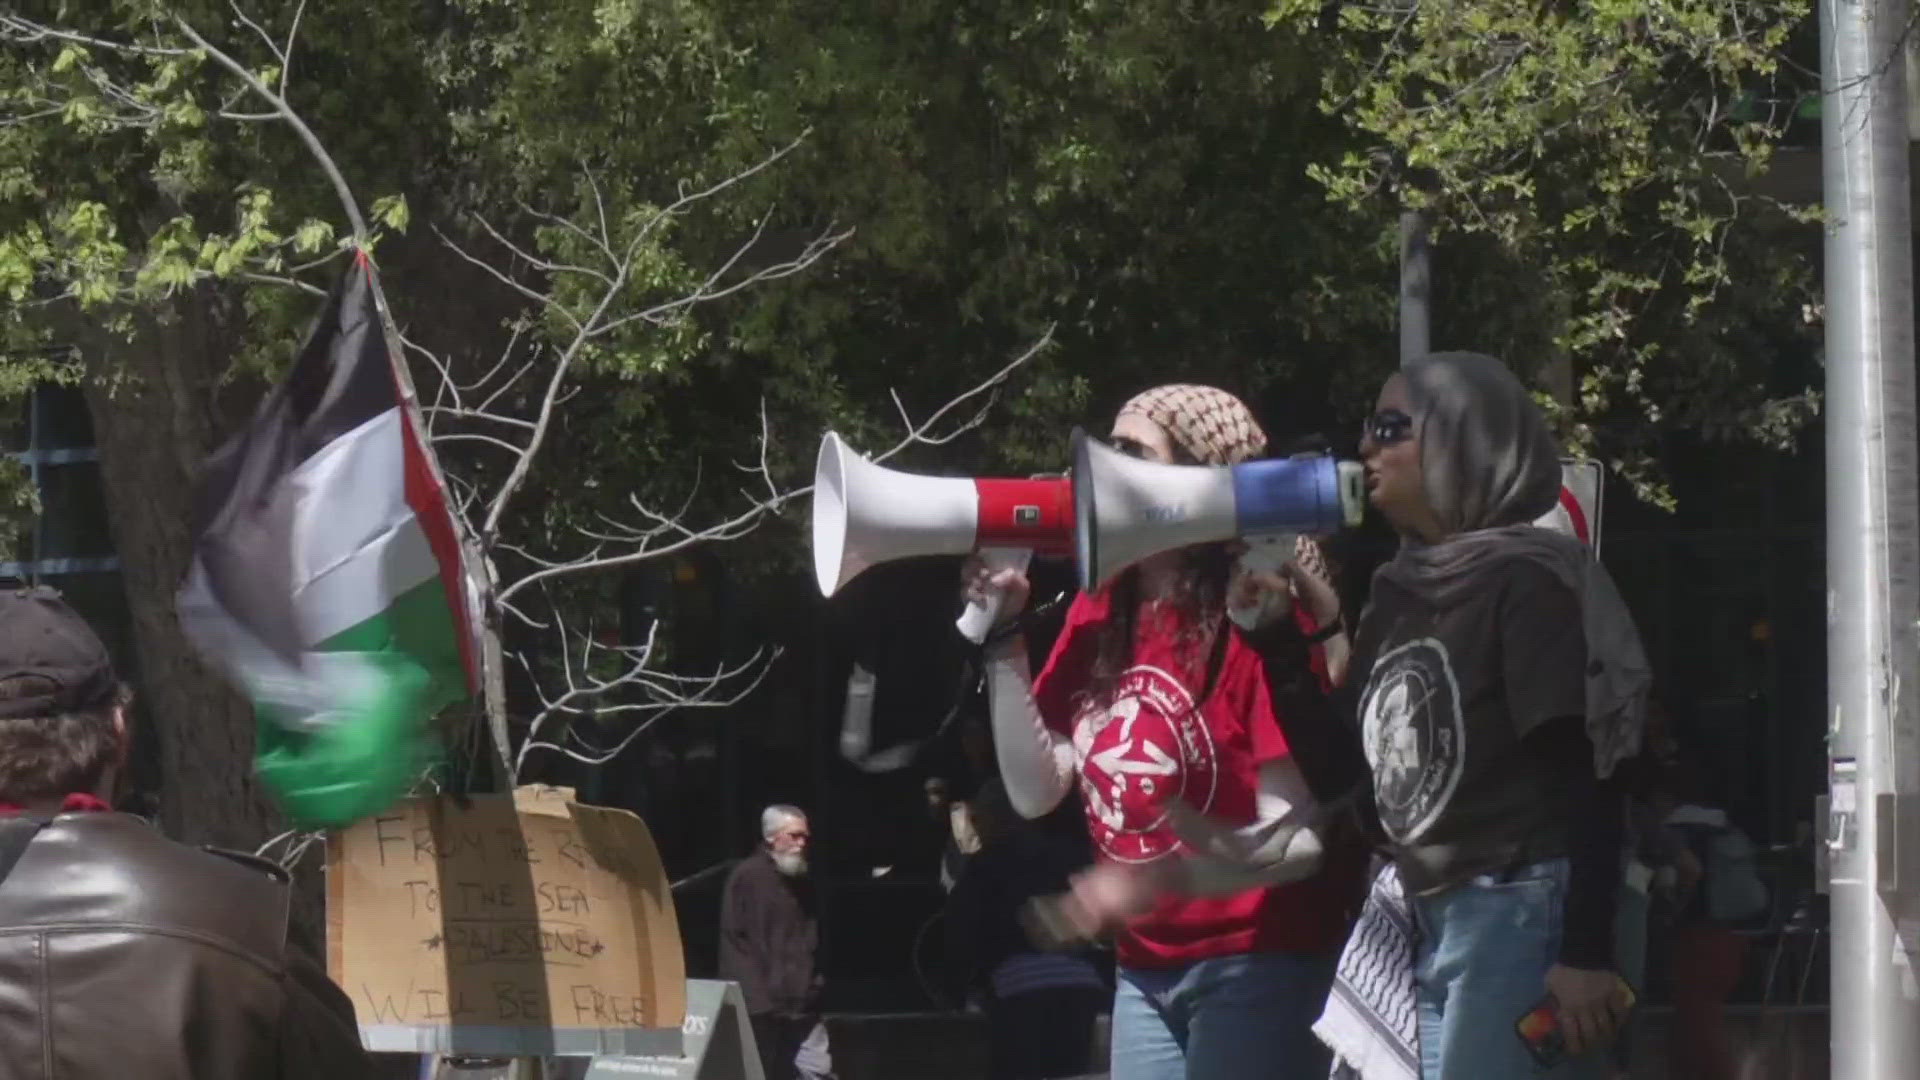 UC Davis students capitalize on May Day for Pro-Palestine event